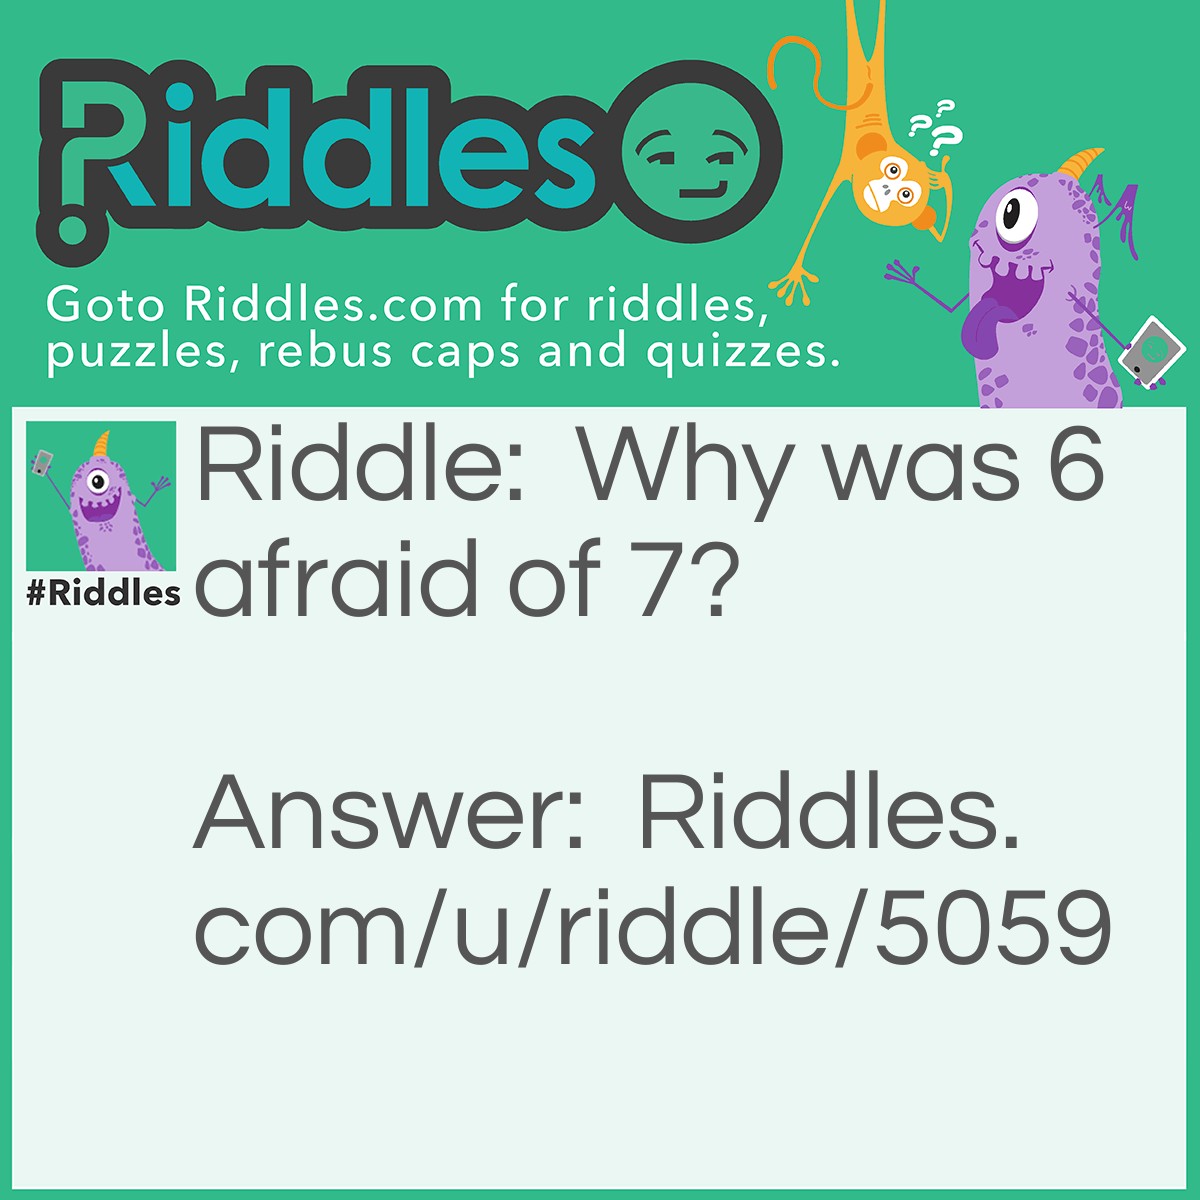 Riddle: Why was 6 afraid of 7? Answer: Because 7 8 9.